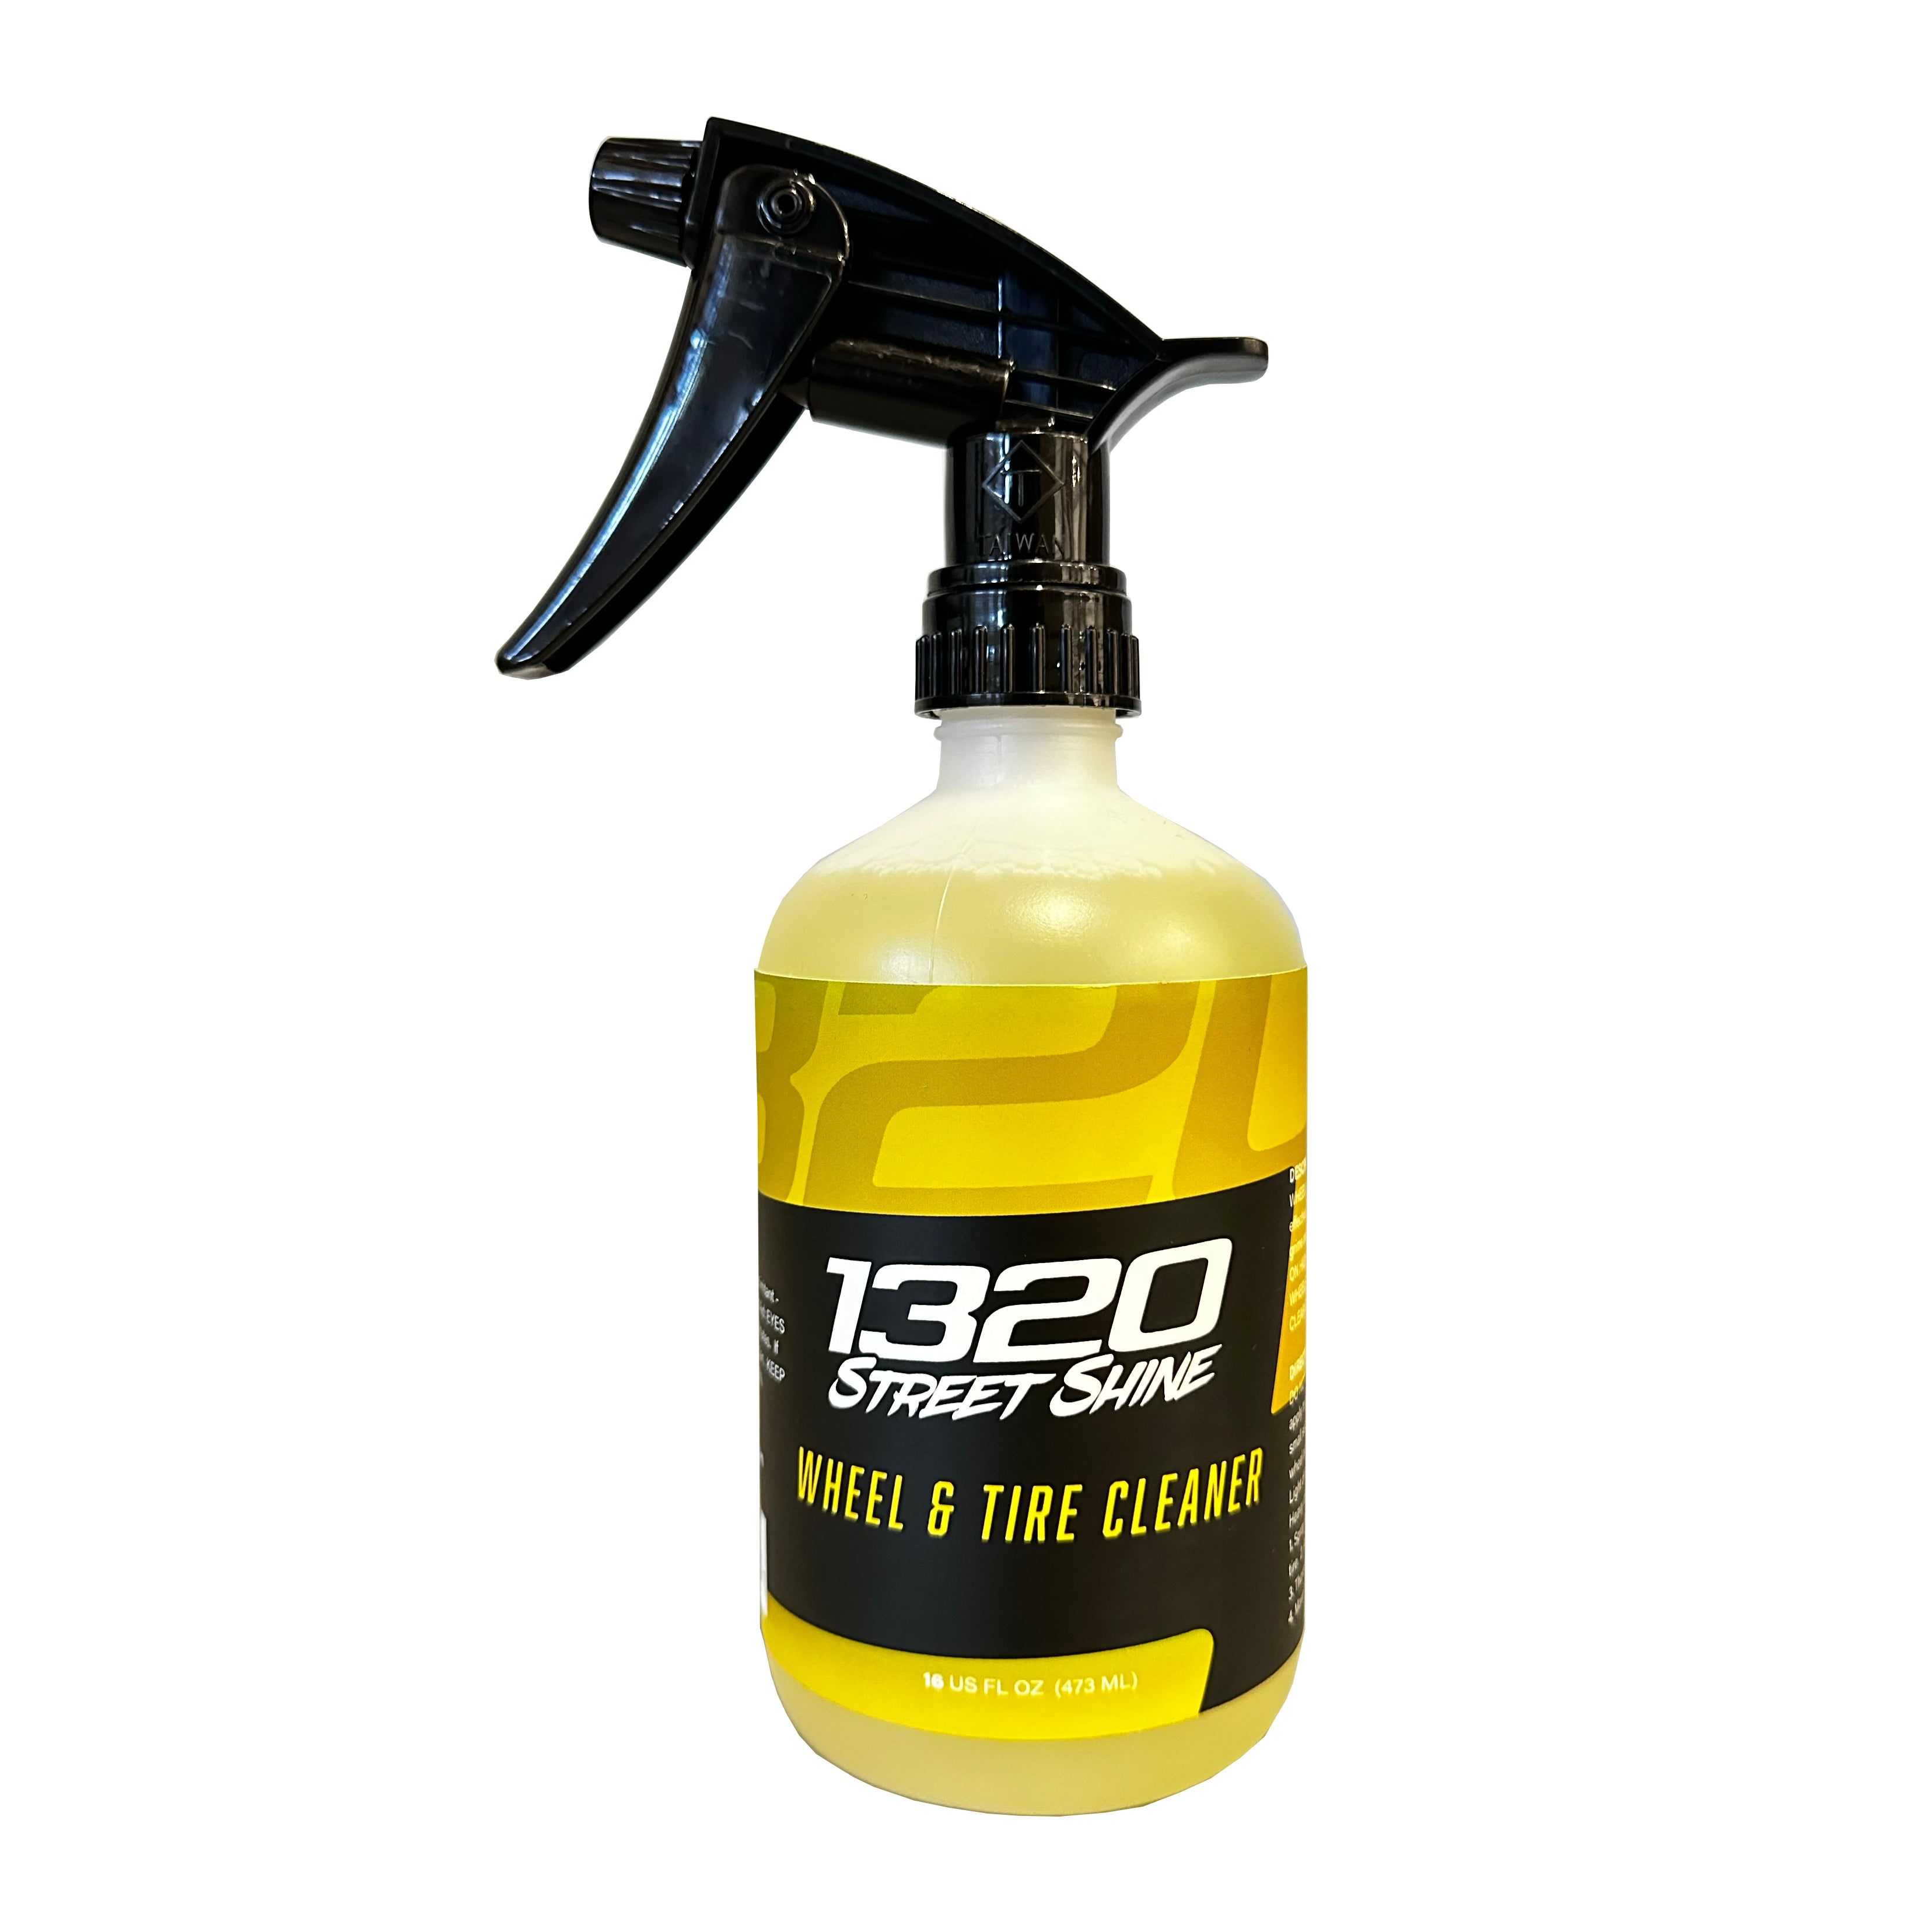 All Wheel & Tire Cleaner, Wheel & Tire Care